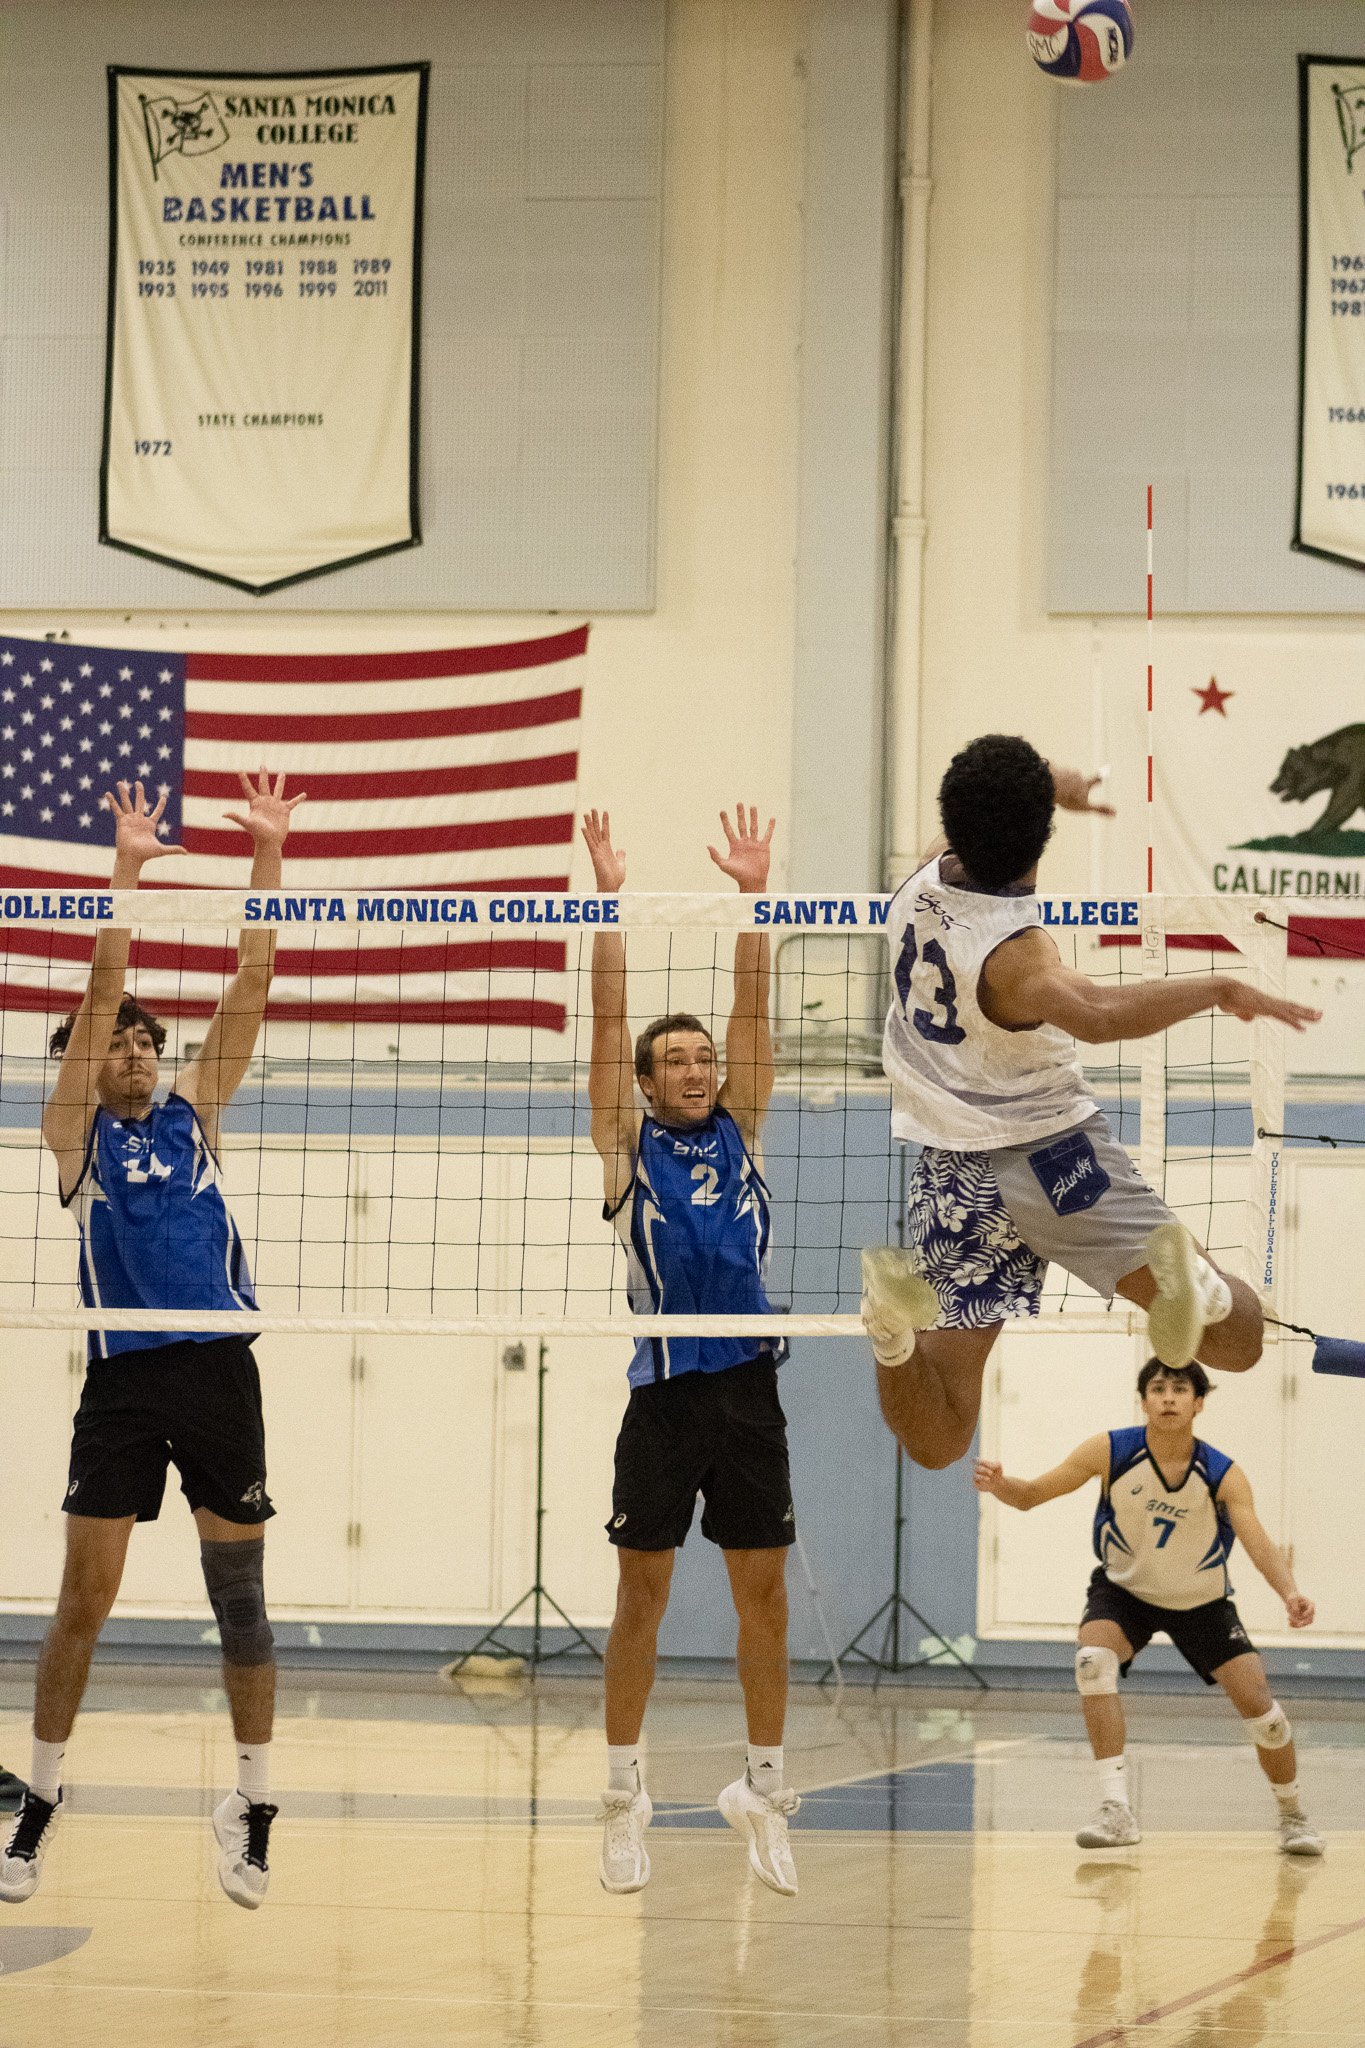  Santa Monica College Corsairs Luis Garzon (left) Kane Schwengel (right) blocking against Irvine Valley College Demetre Gossett during a volleyball game in Santa Monica, Calif. Friday, Feb. 24, 2023. The game ended with the Corsair's defeat: 3 - 1. L